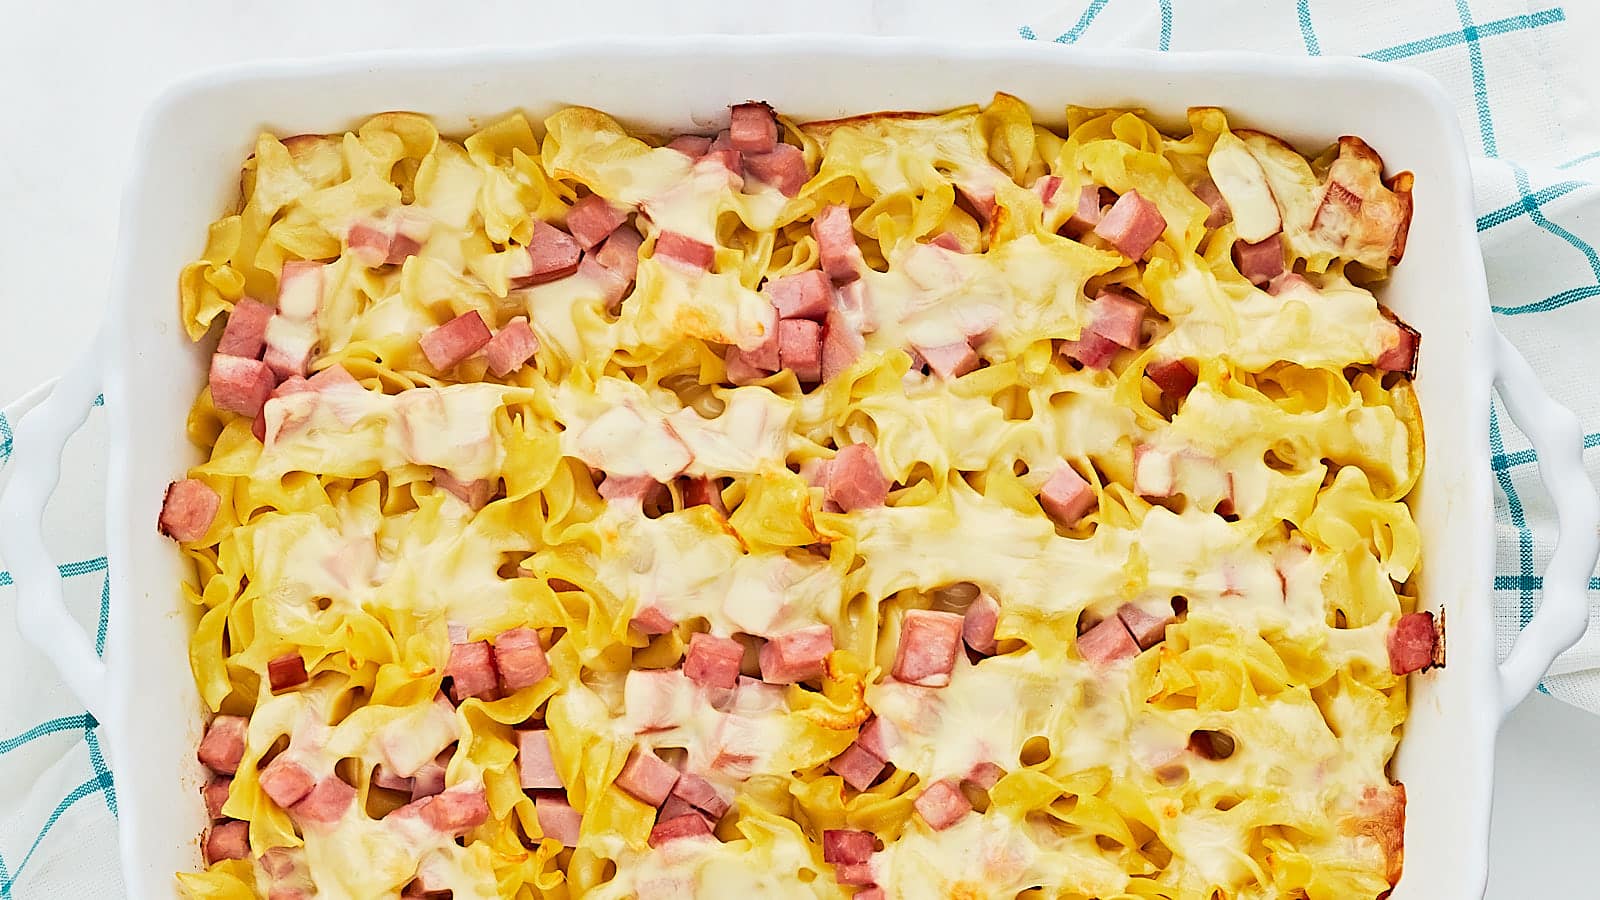 Ham and cheese casserole in a white baking dish.